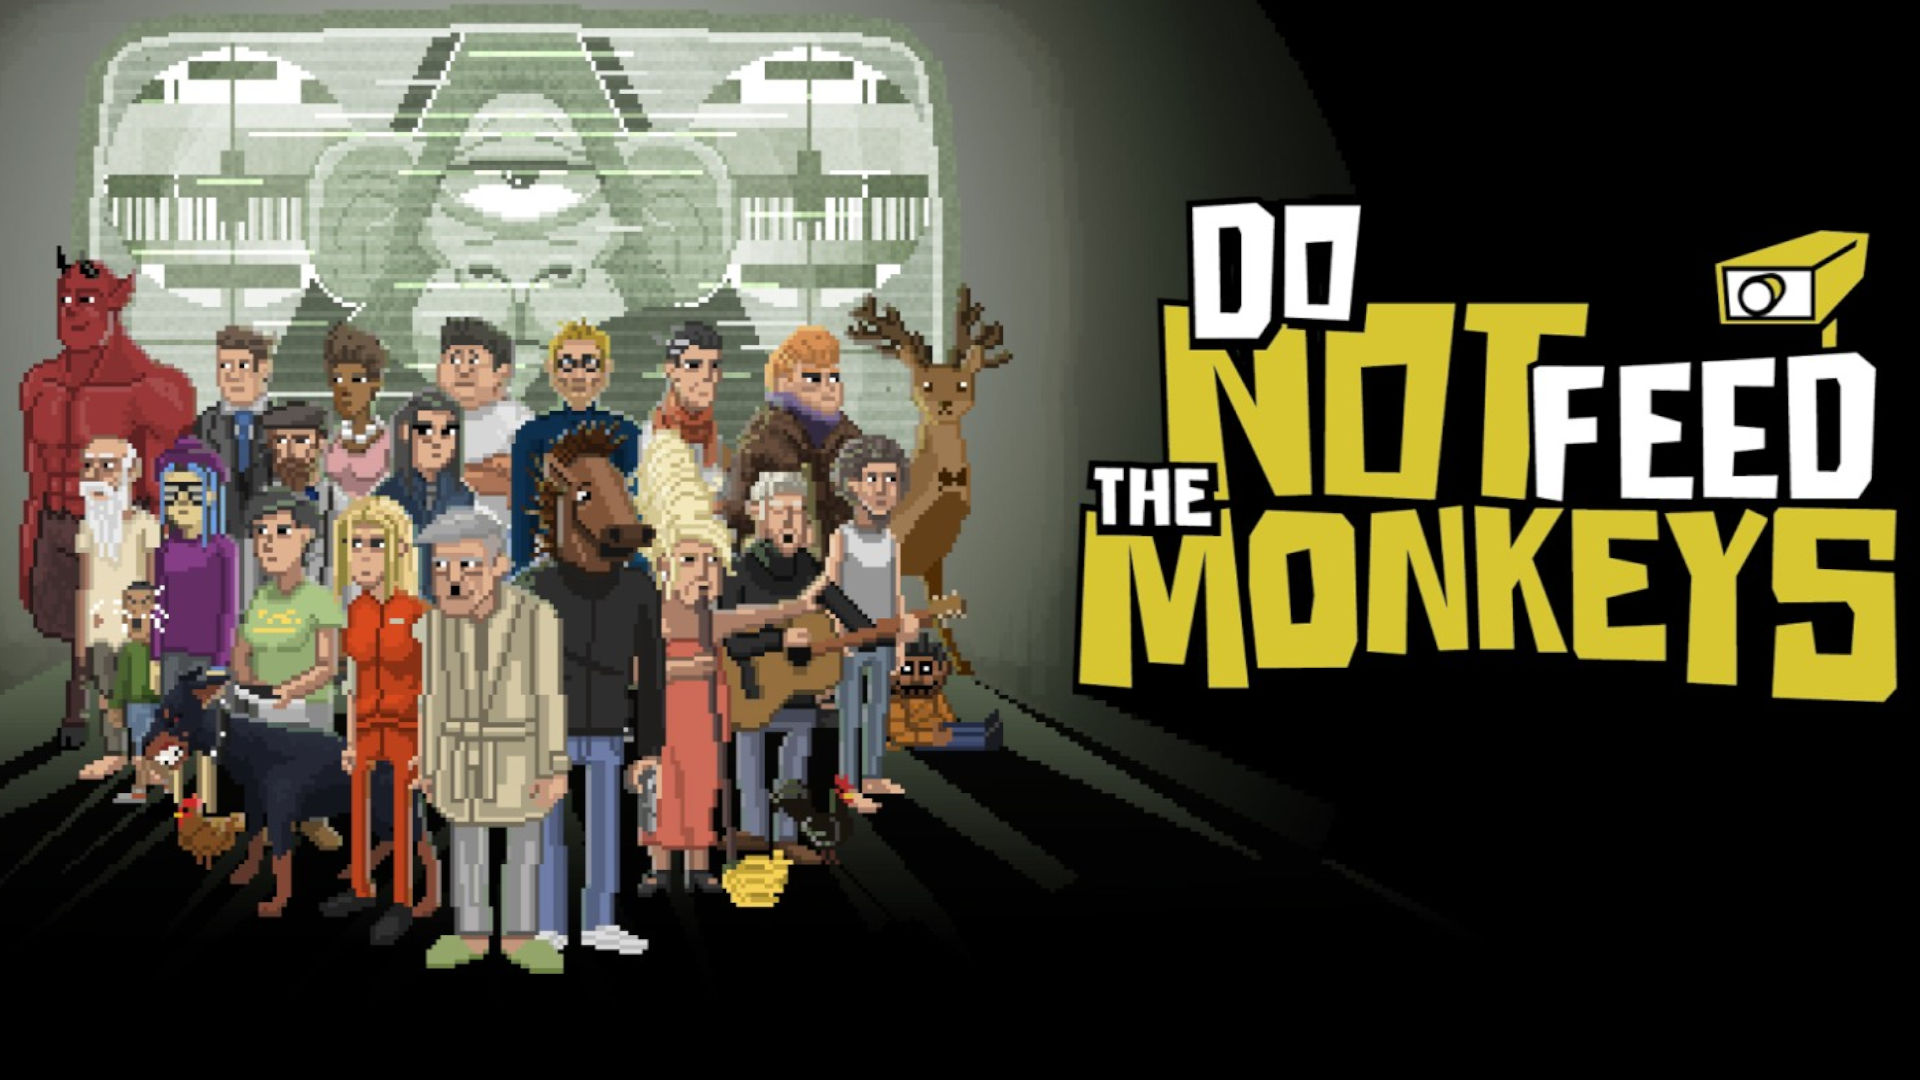 Cover art for Do Not Feed the Monkeys game from monkey games list